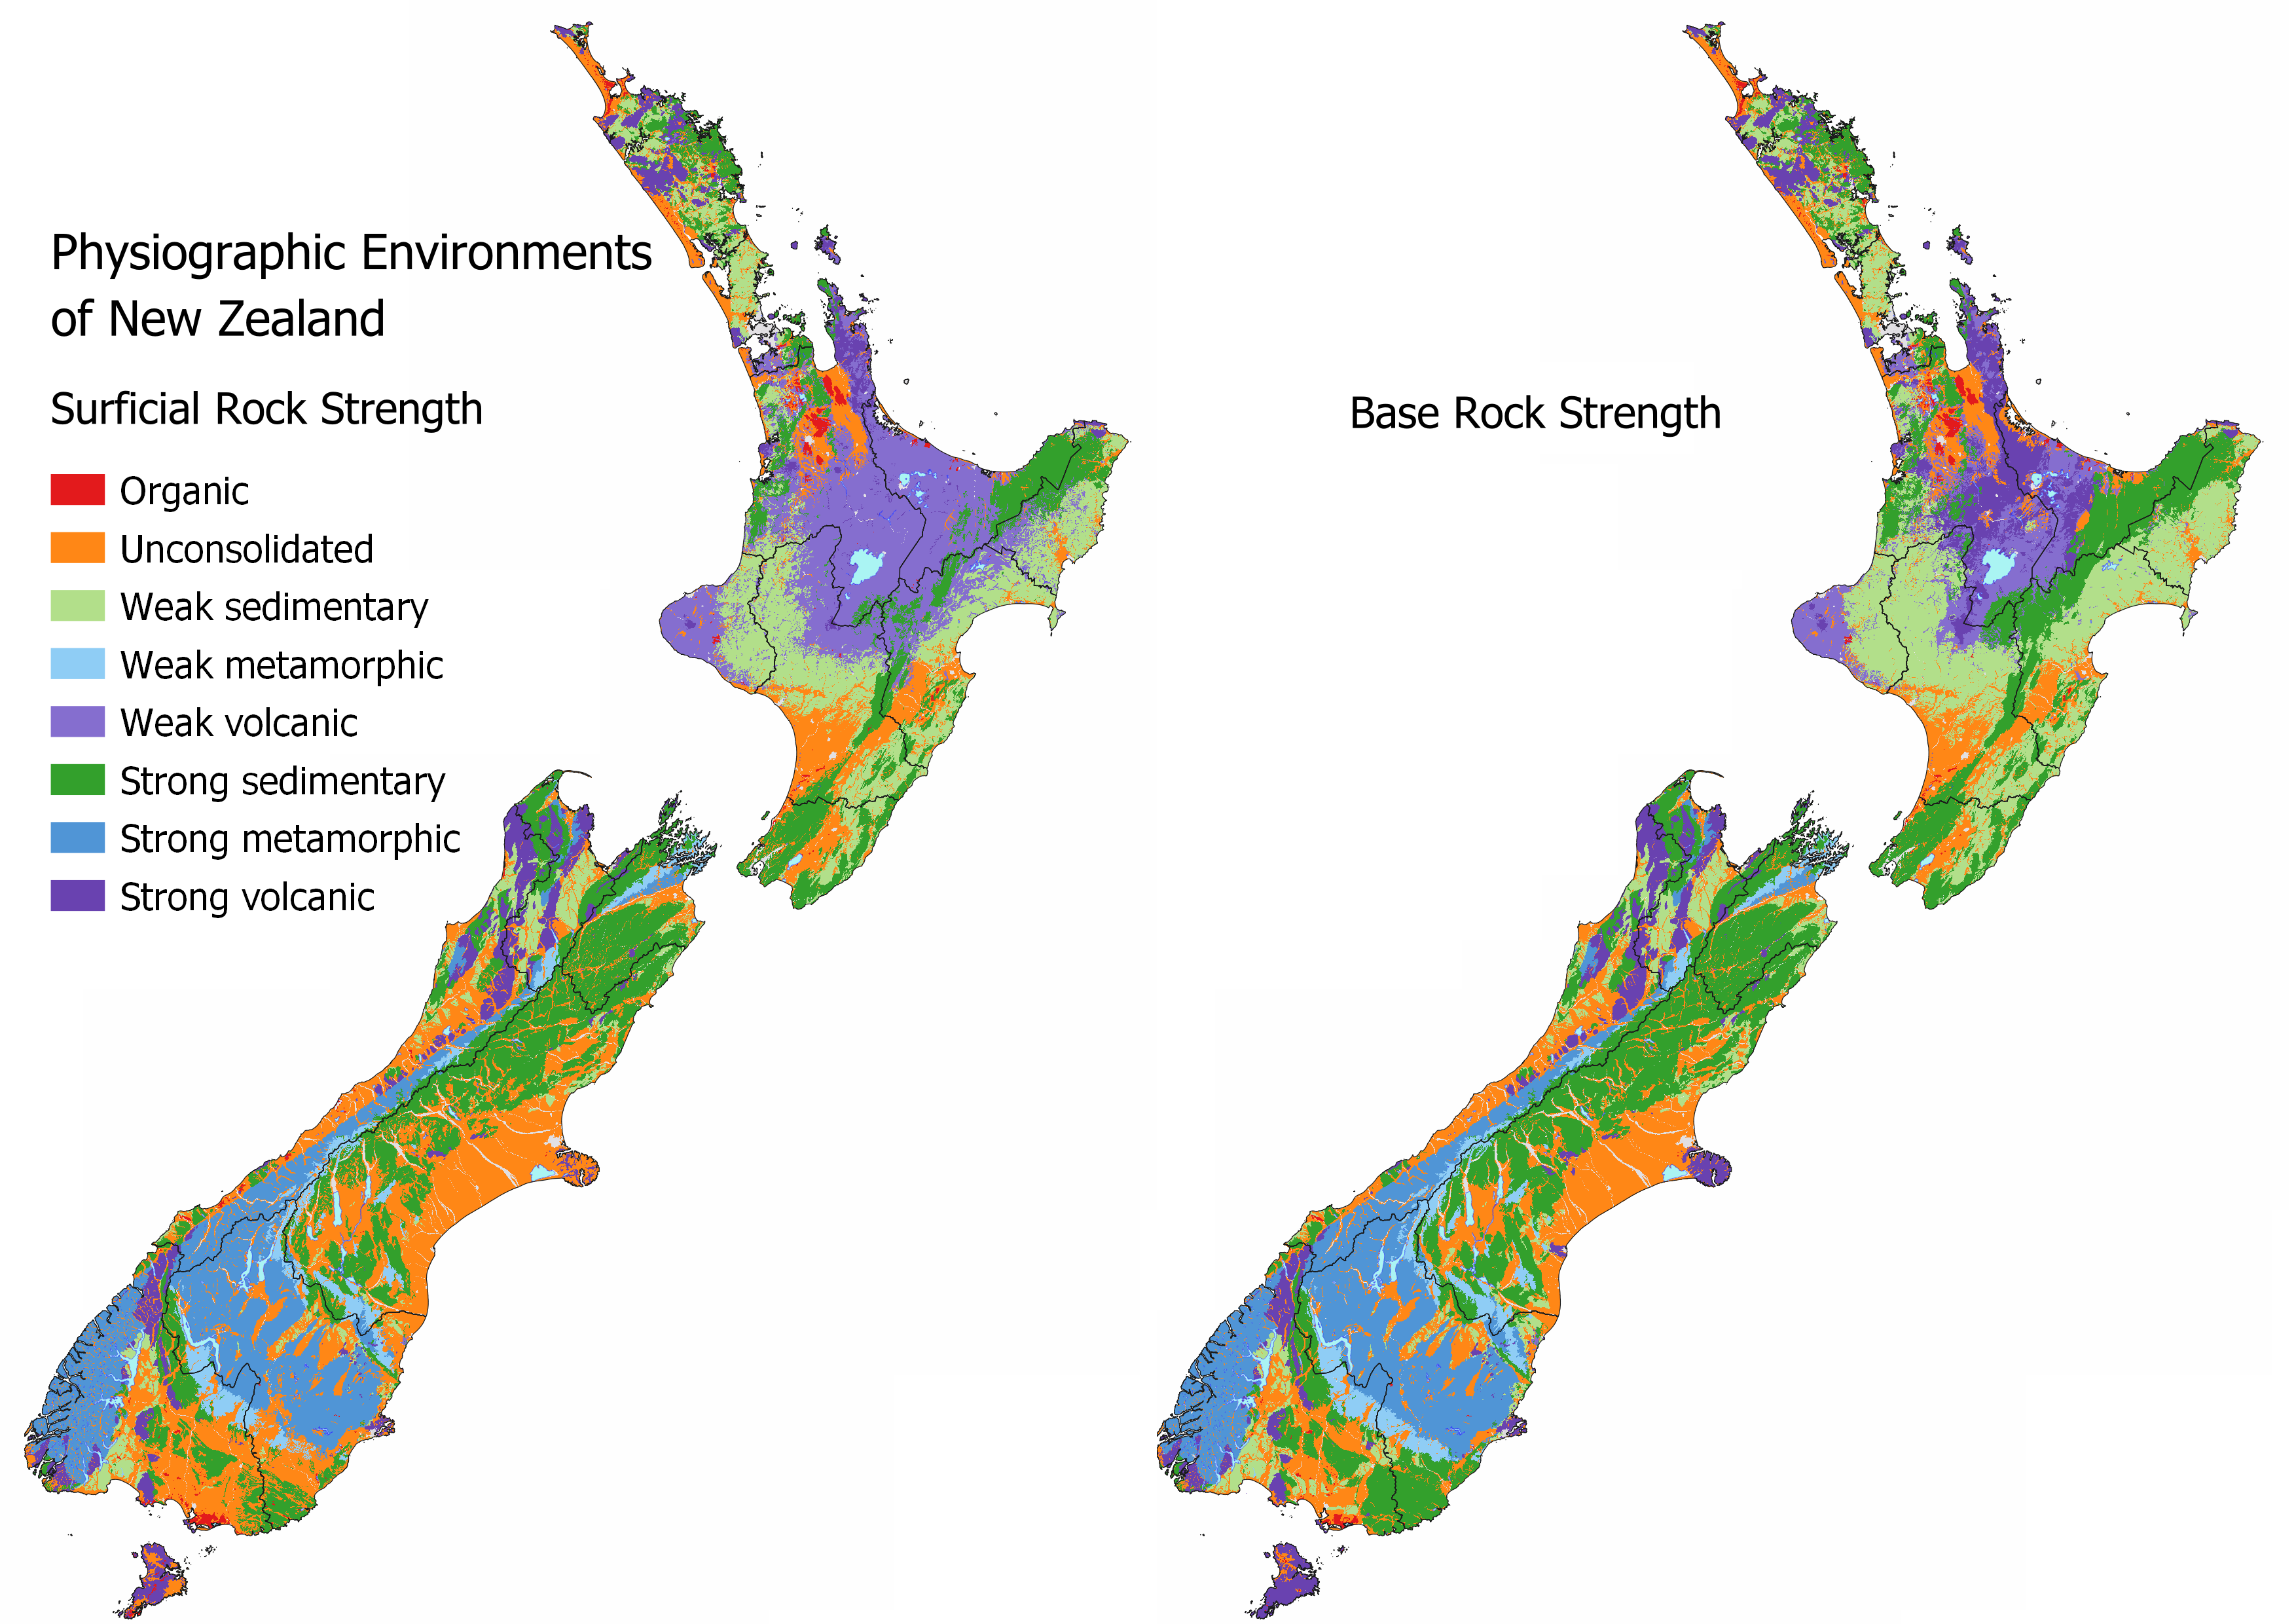 Two colour-coded maps of New Zealand showing rock strength from Organic (Waituna Lagoon) to Strong volcanic (Taupo).